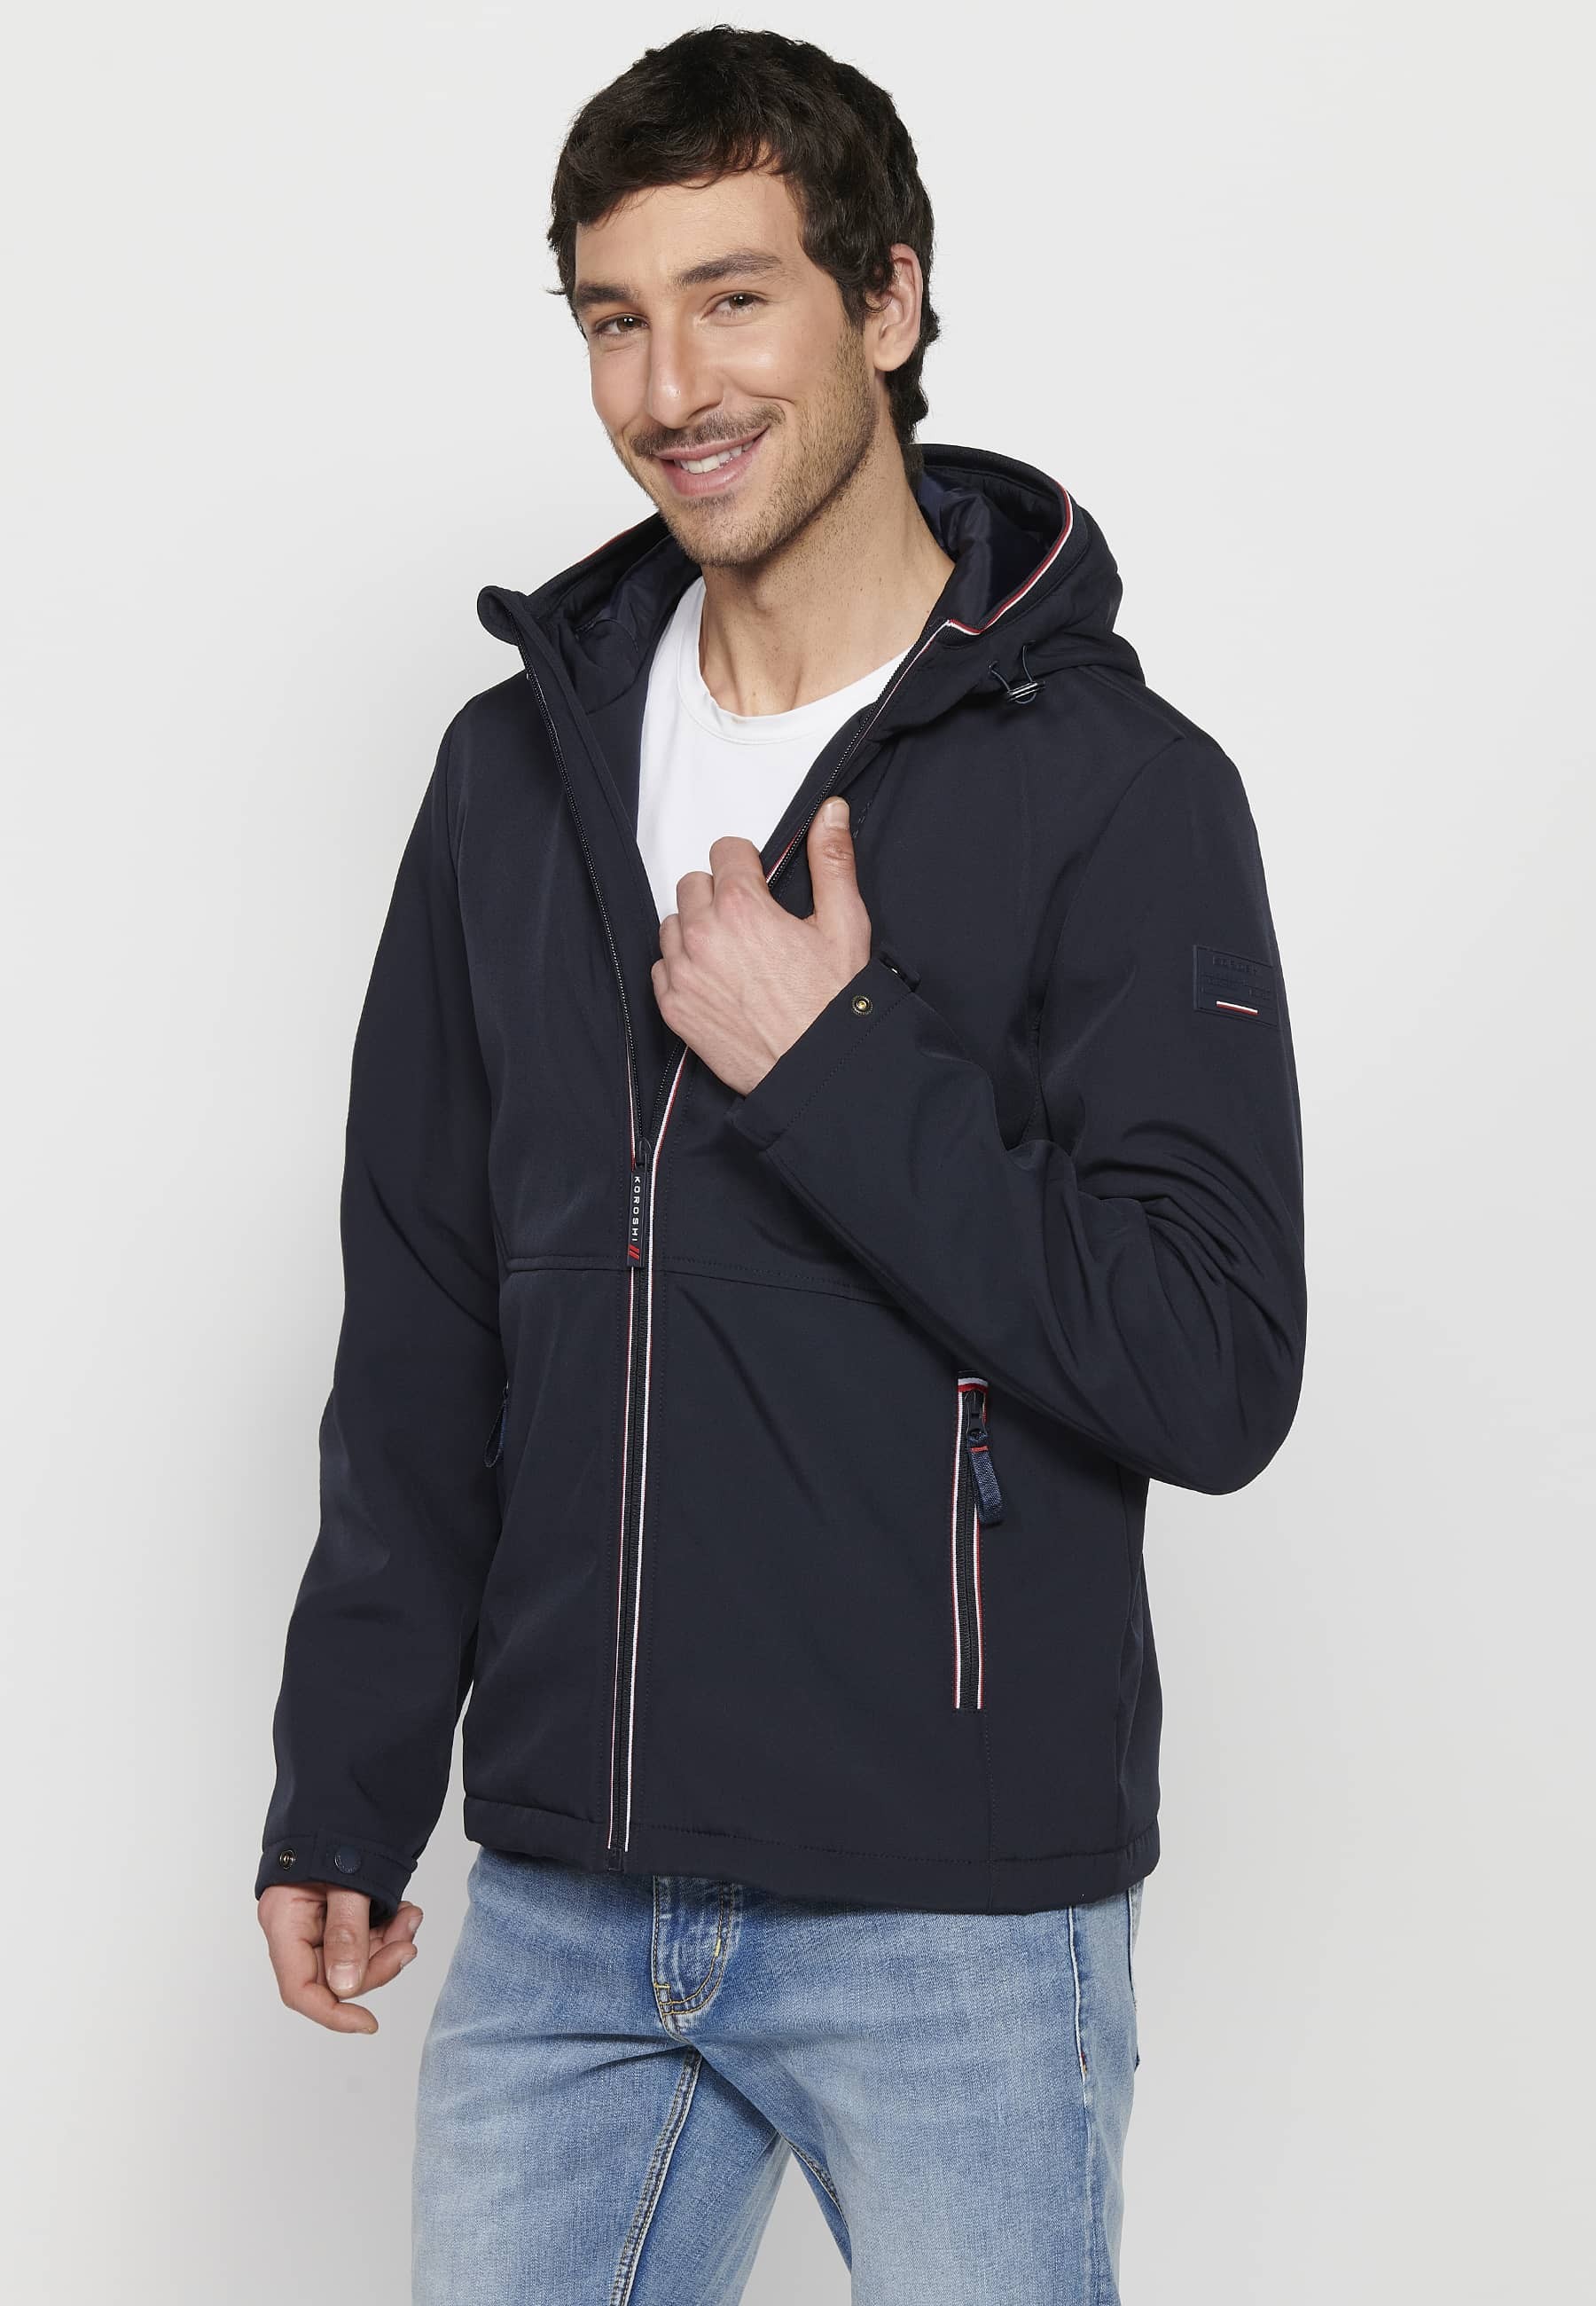 Navy Long Sleeve Jacket with Hooded Collar and Front Zipper Closure for Men 3